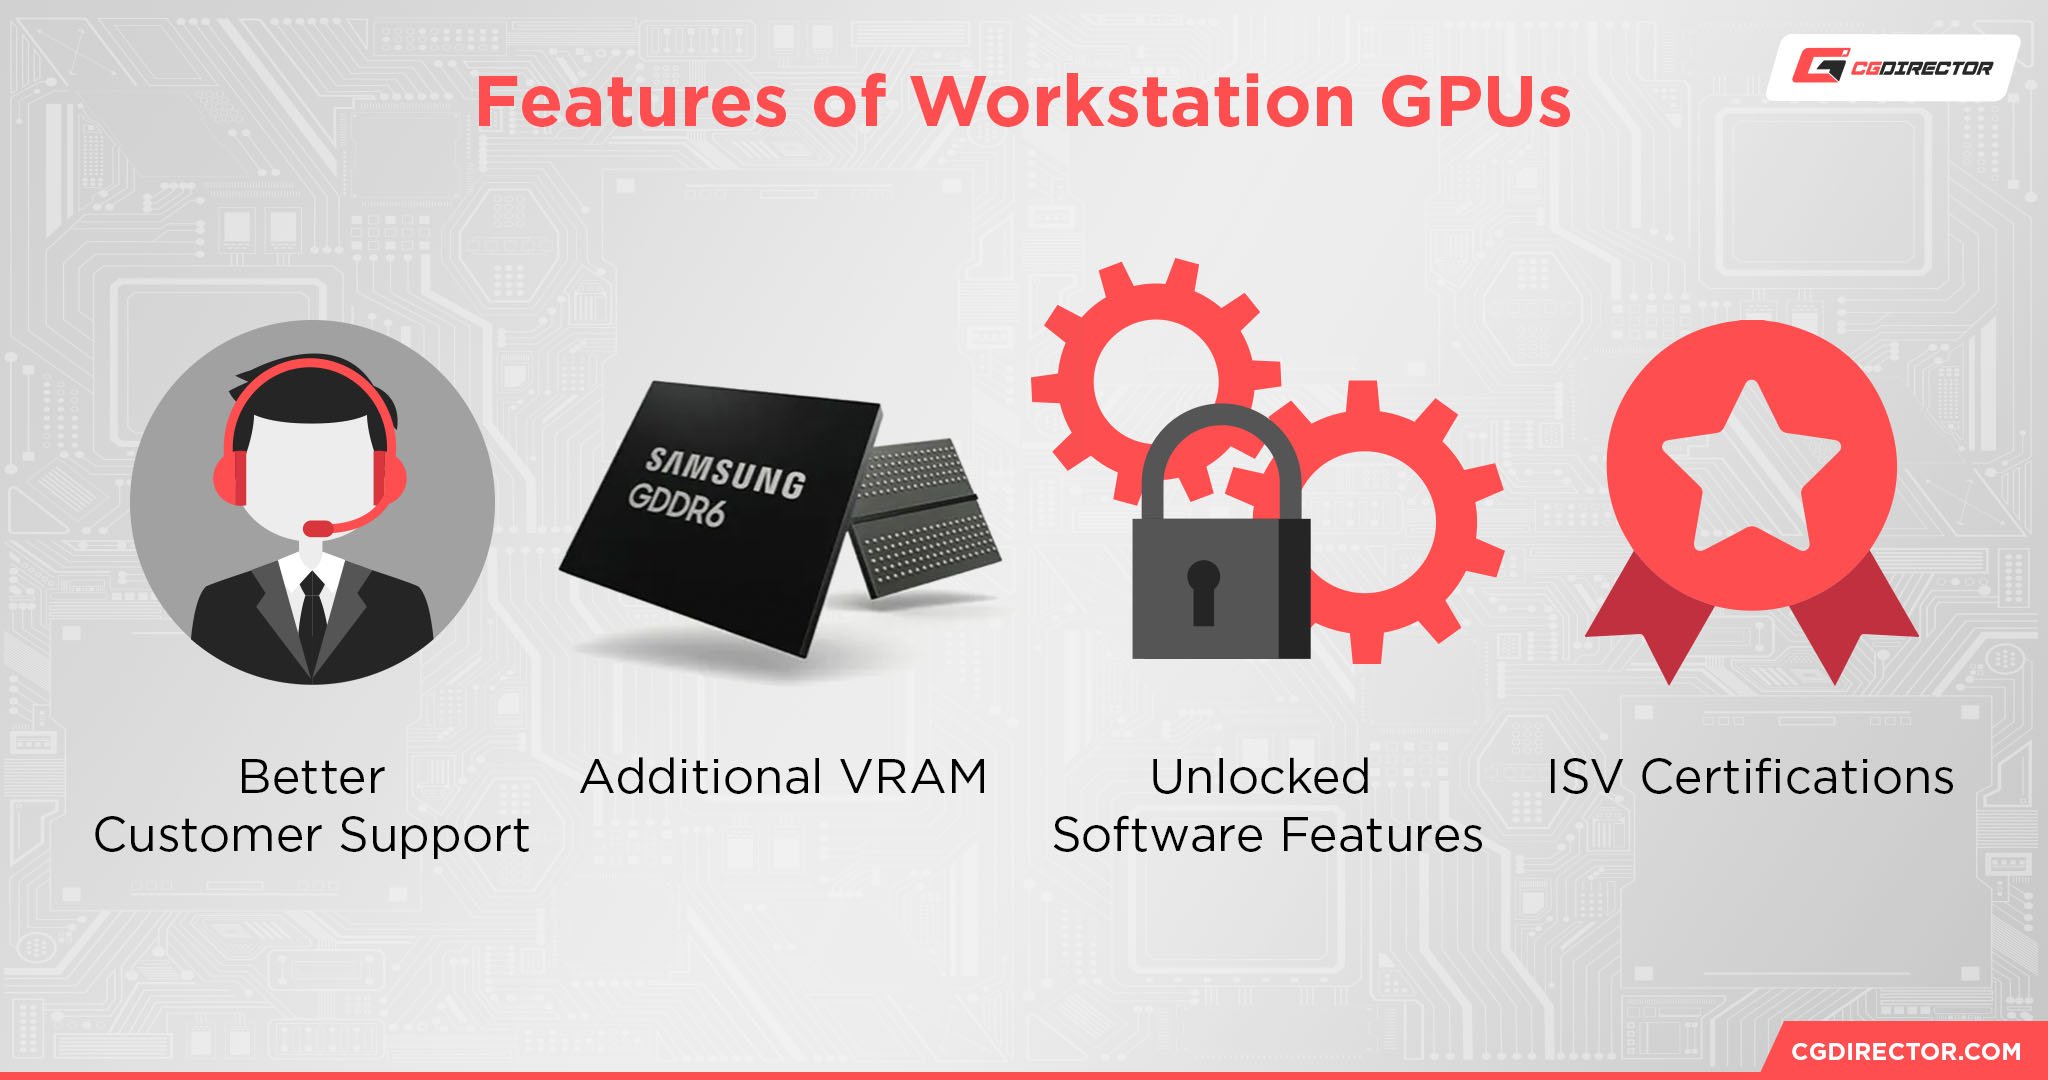 Features of Workstation GPUs